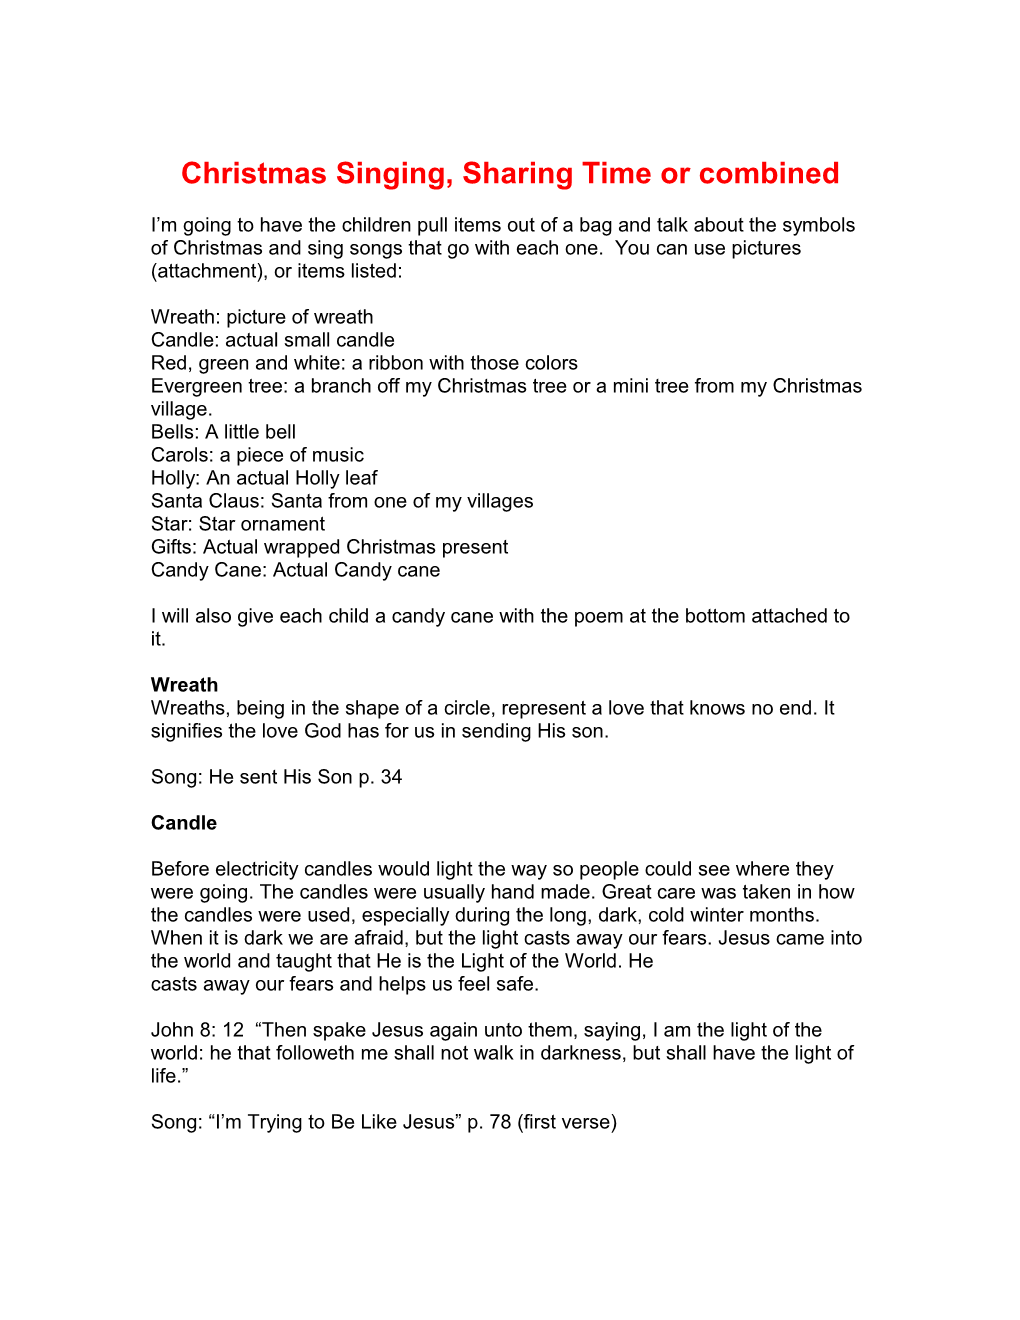 Christmas Singing Or Sharing Time